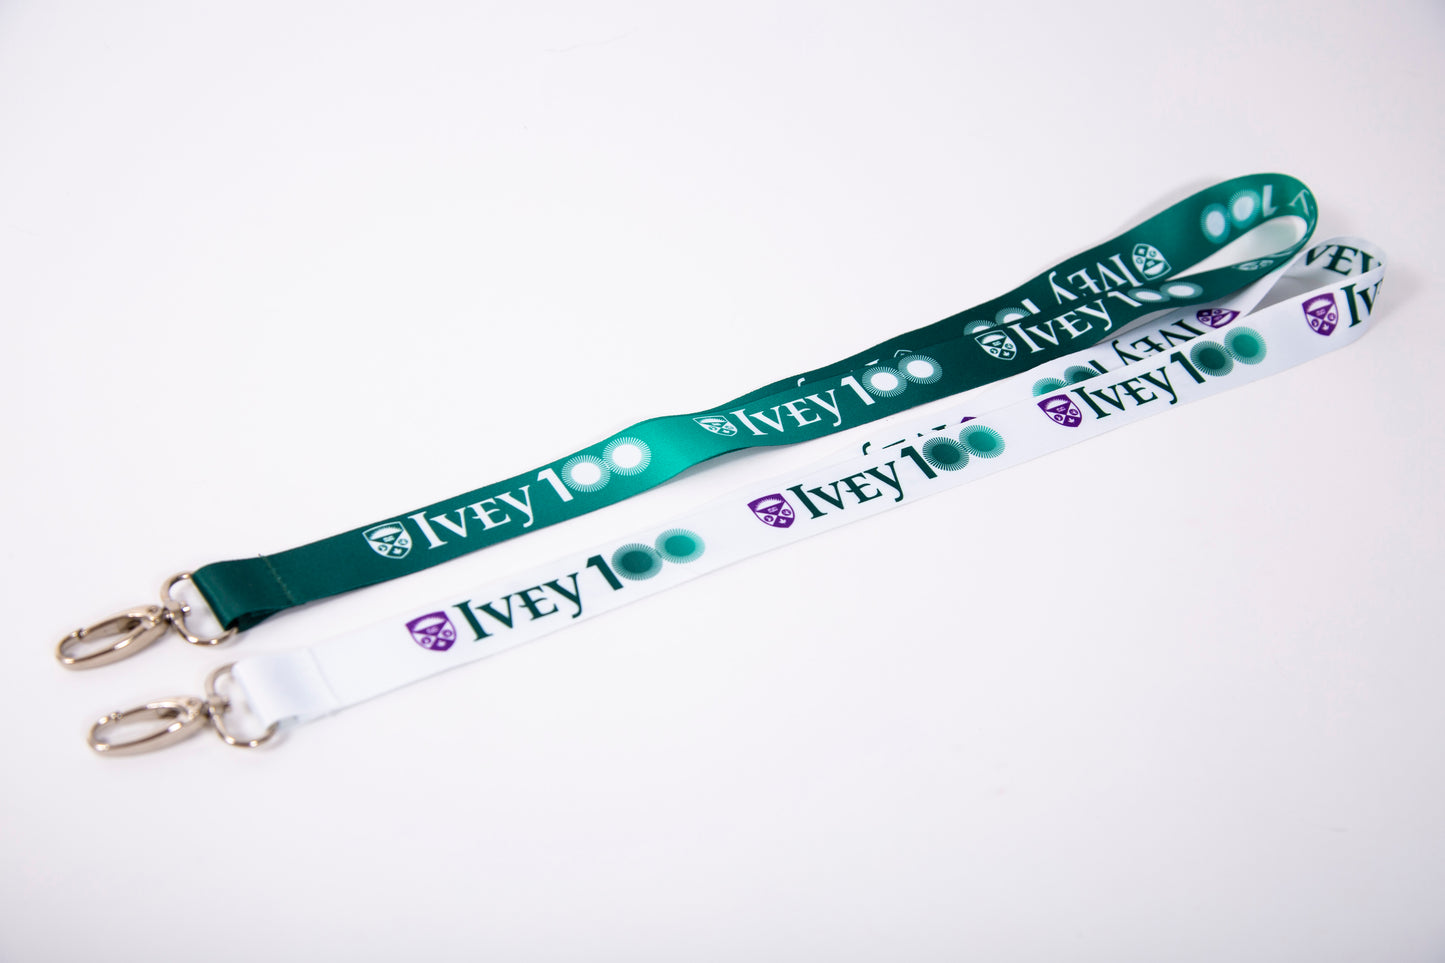 Ivey Centennial Green Lanyard with Lobster Claw